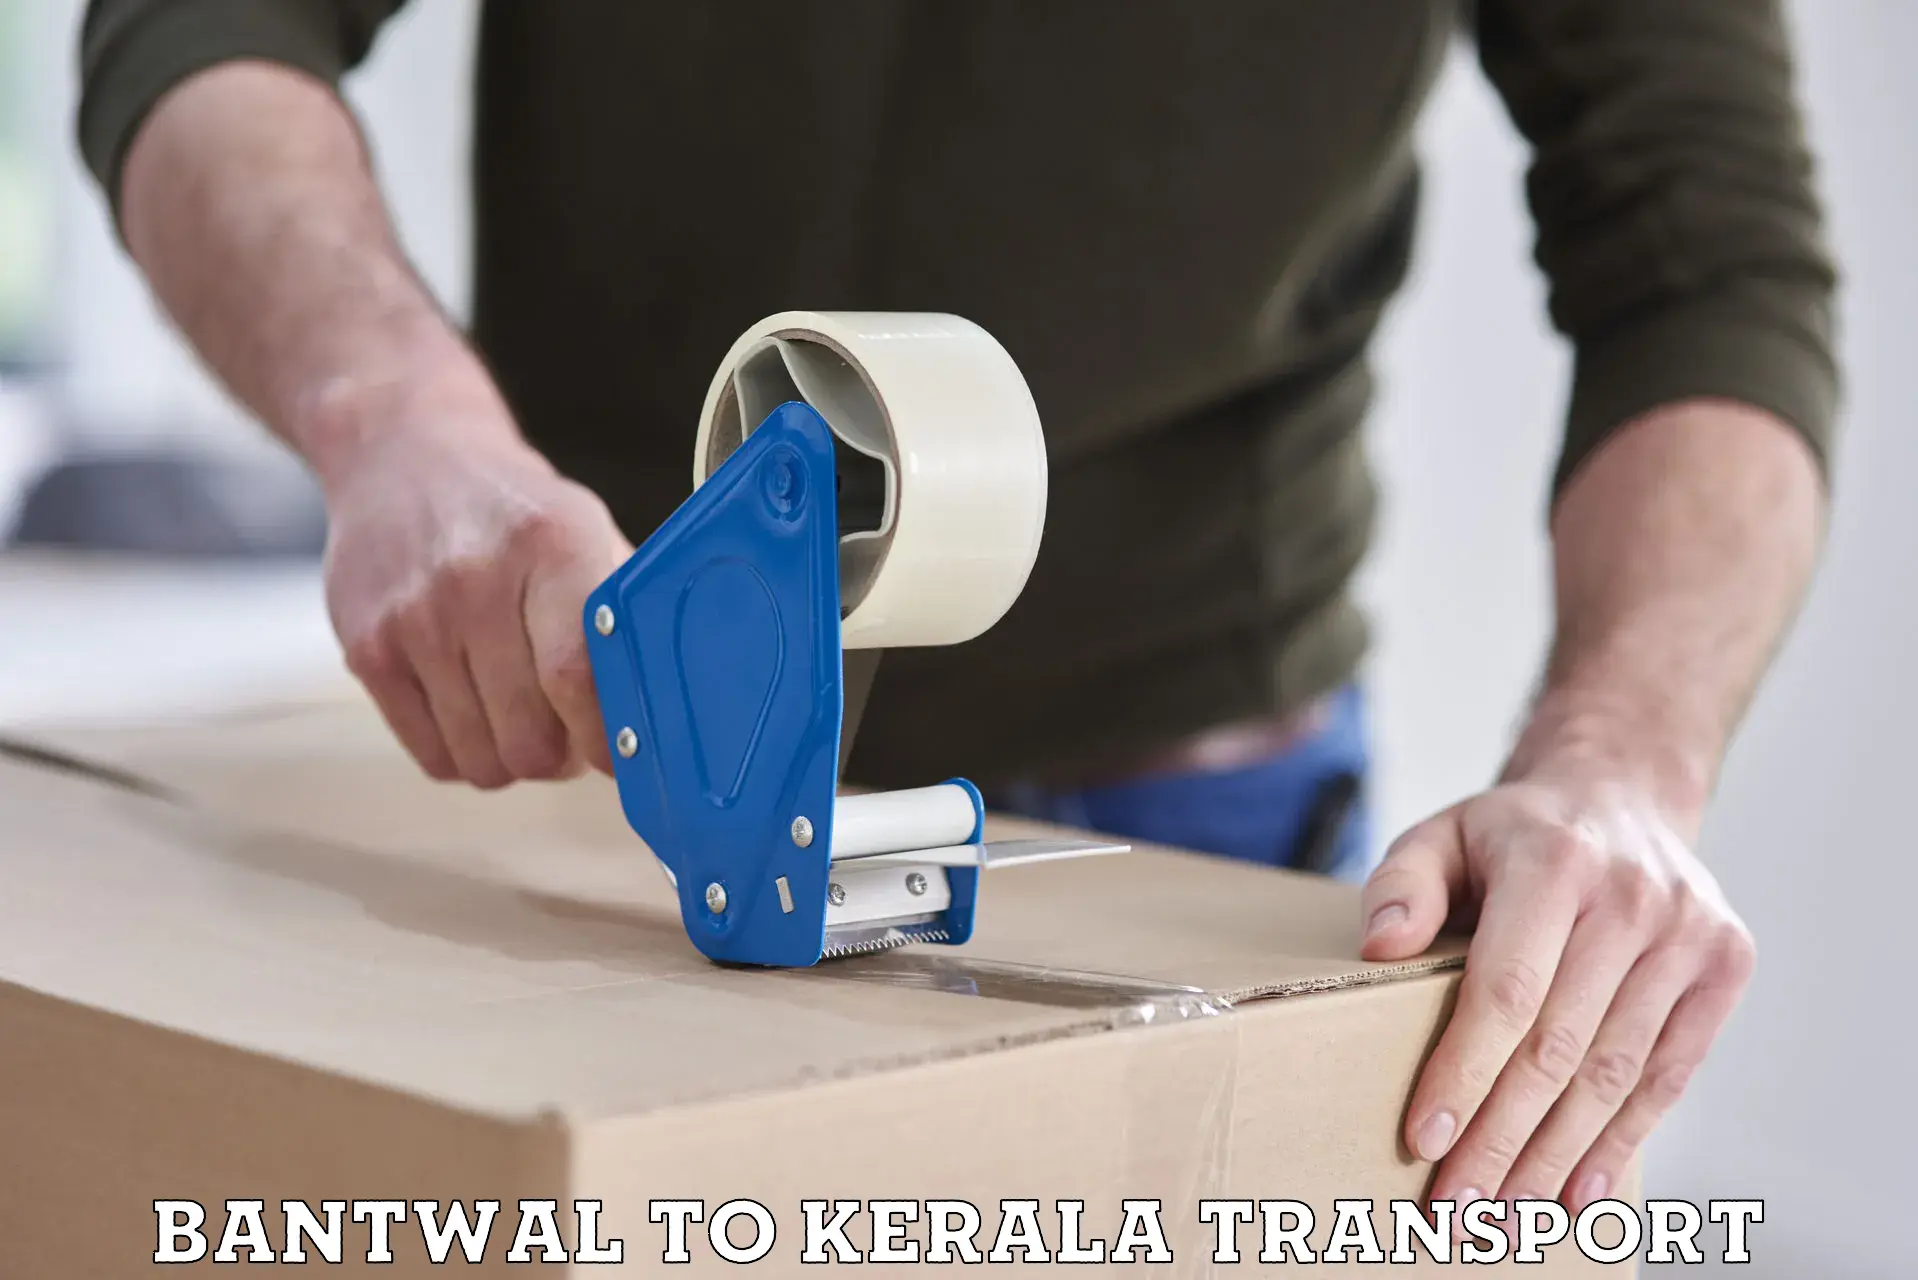 Container transport service Bantwal to Kerala